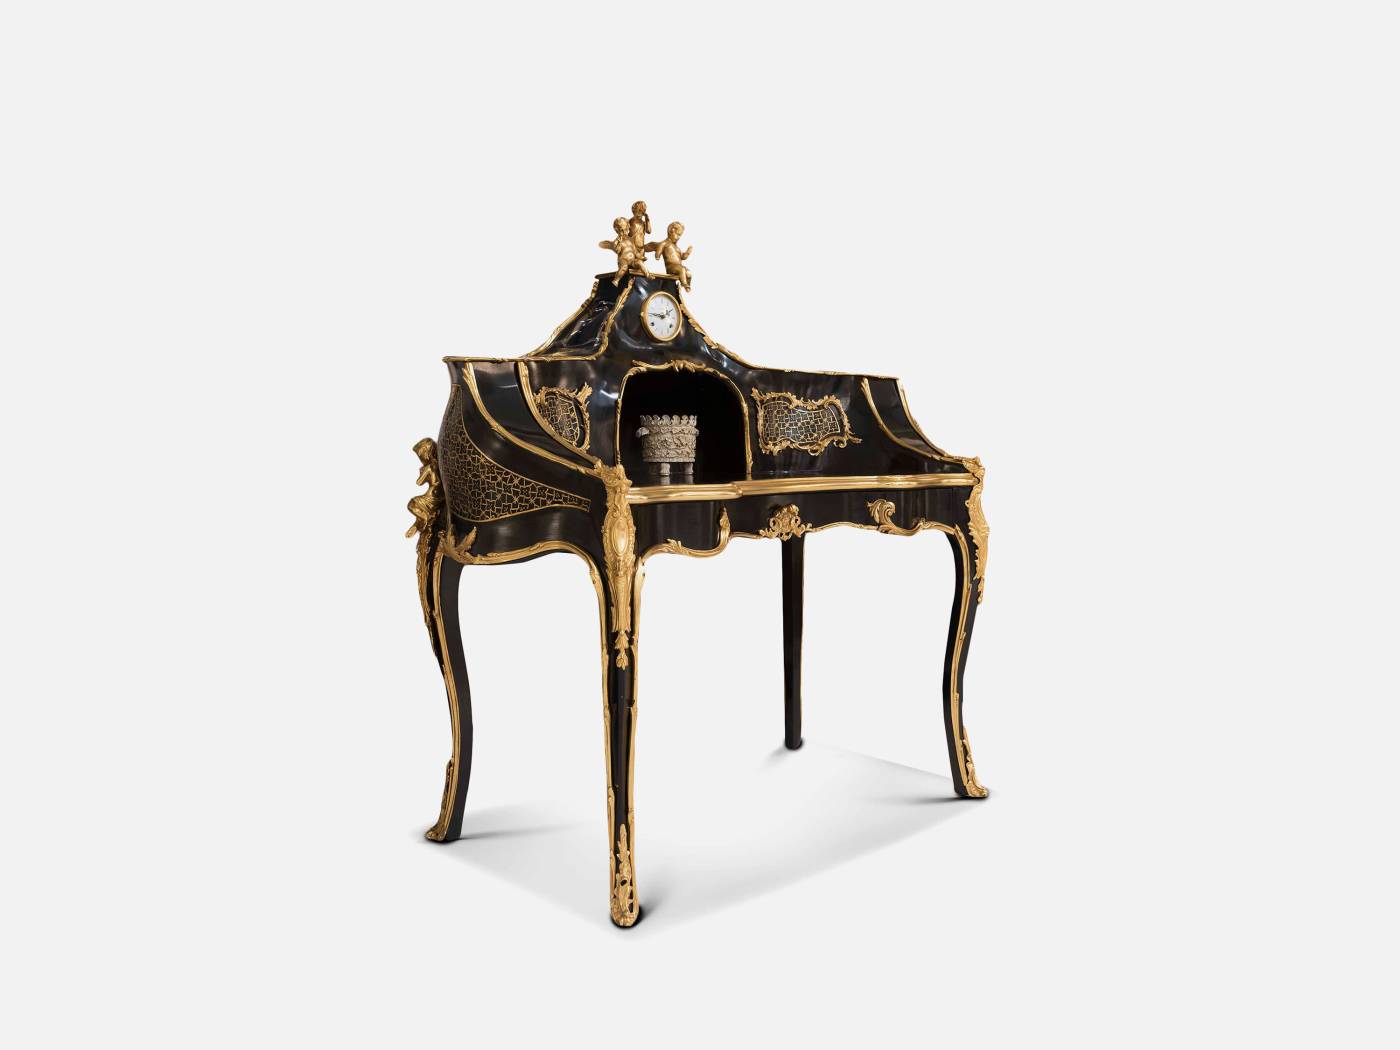 ART. 1515-19 - C.G. Capelletti quality furniture and timeless elegance with luxury made in italy contemporary Desks and writing desks.